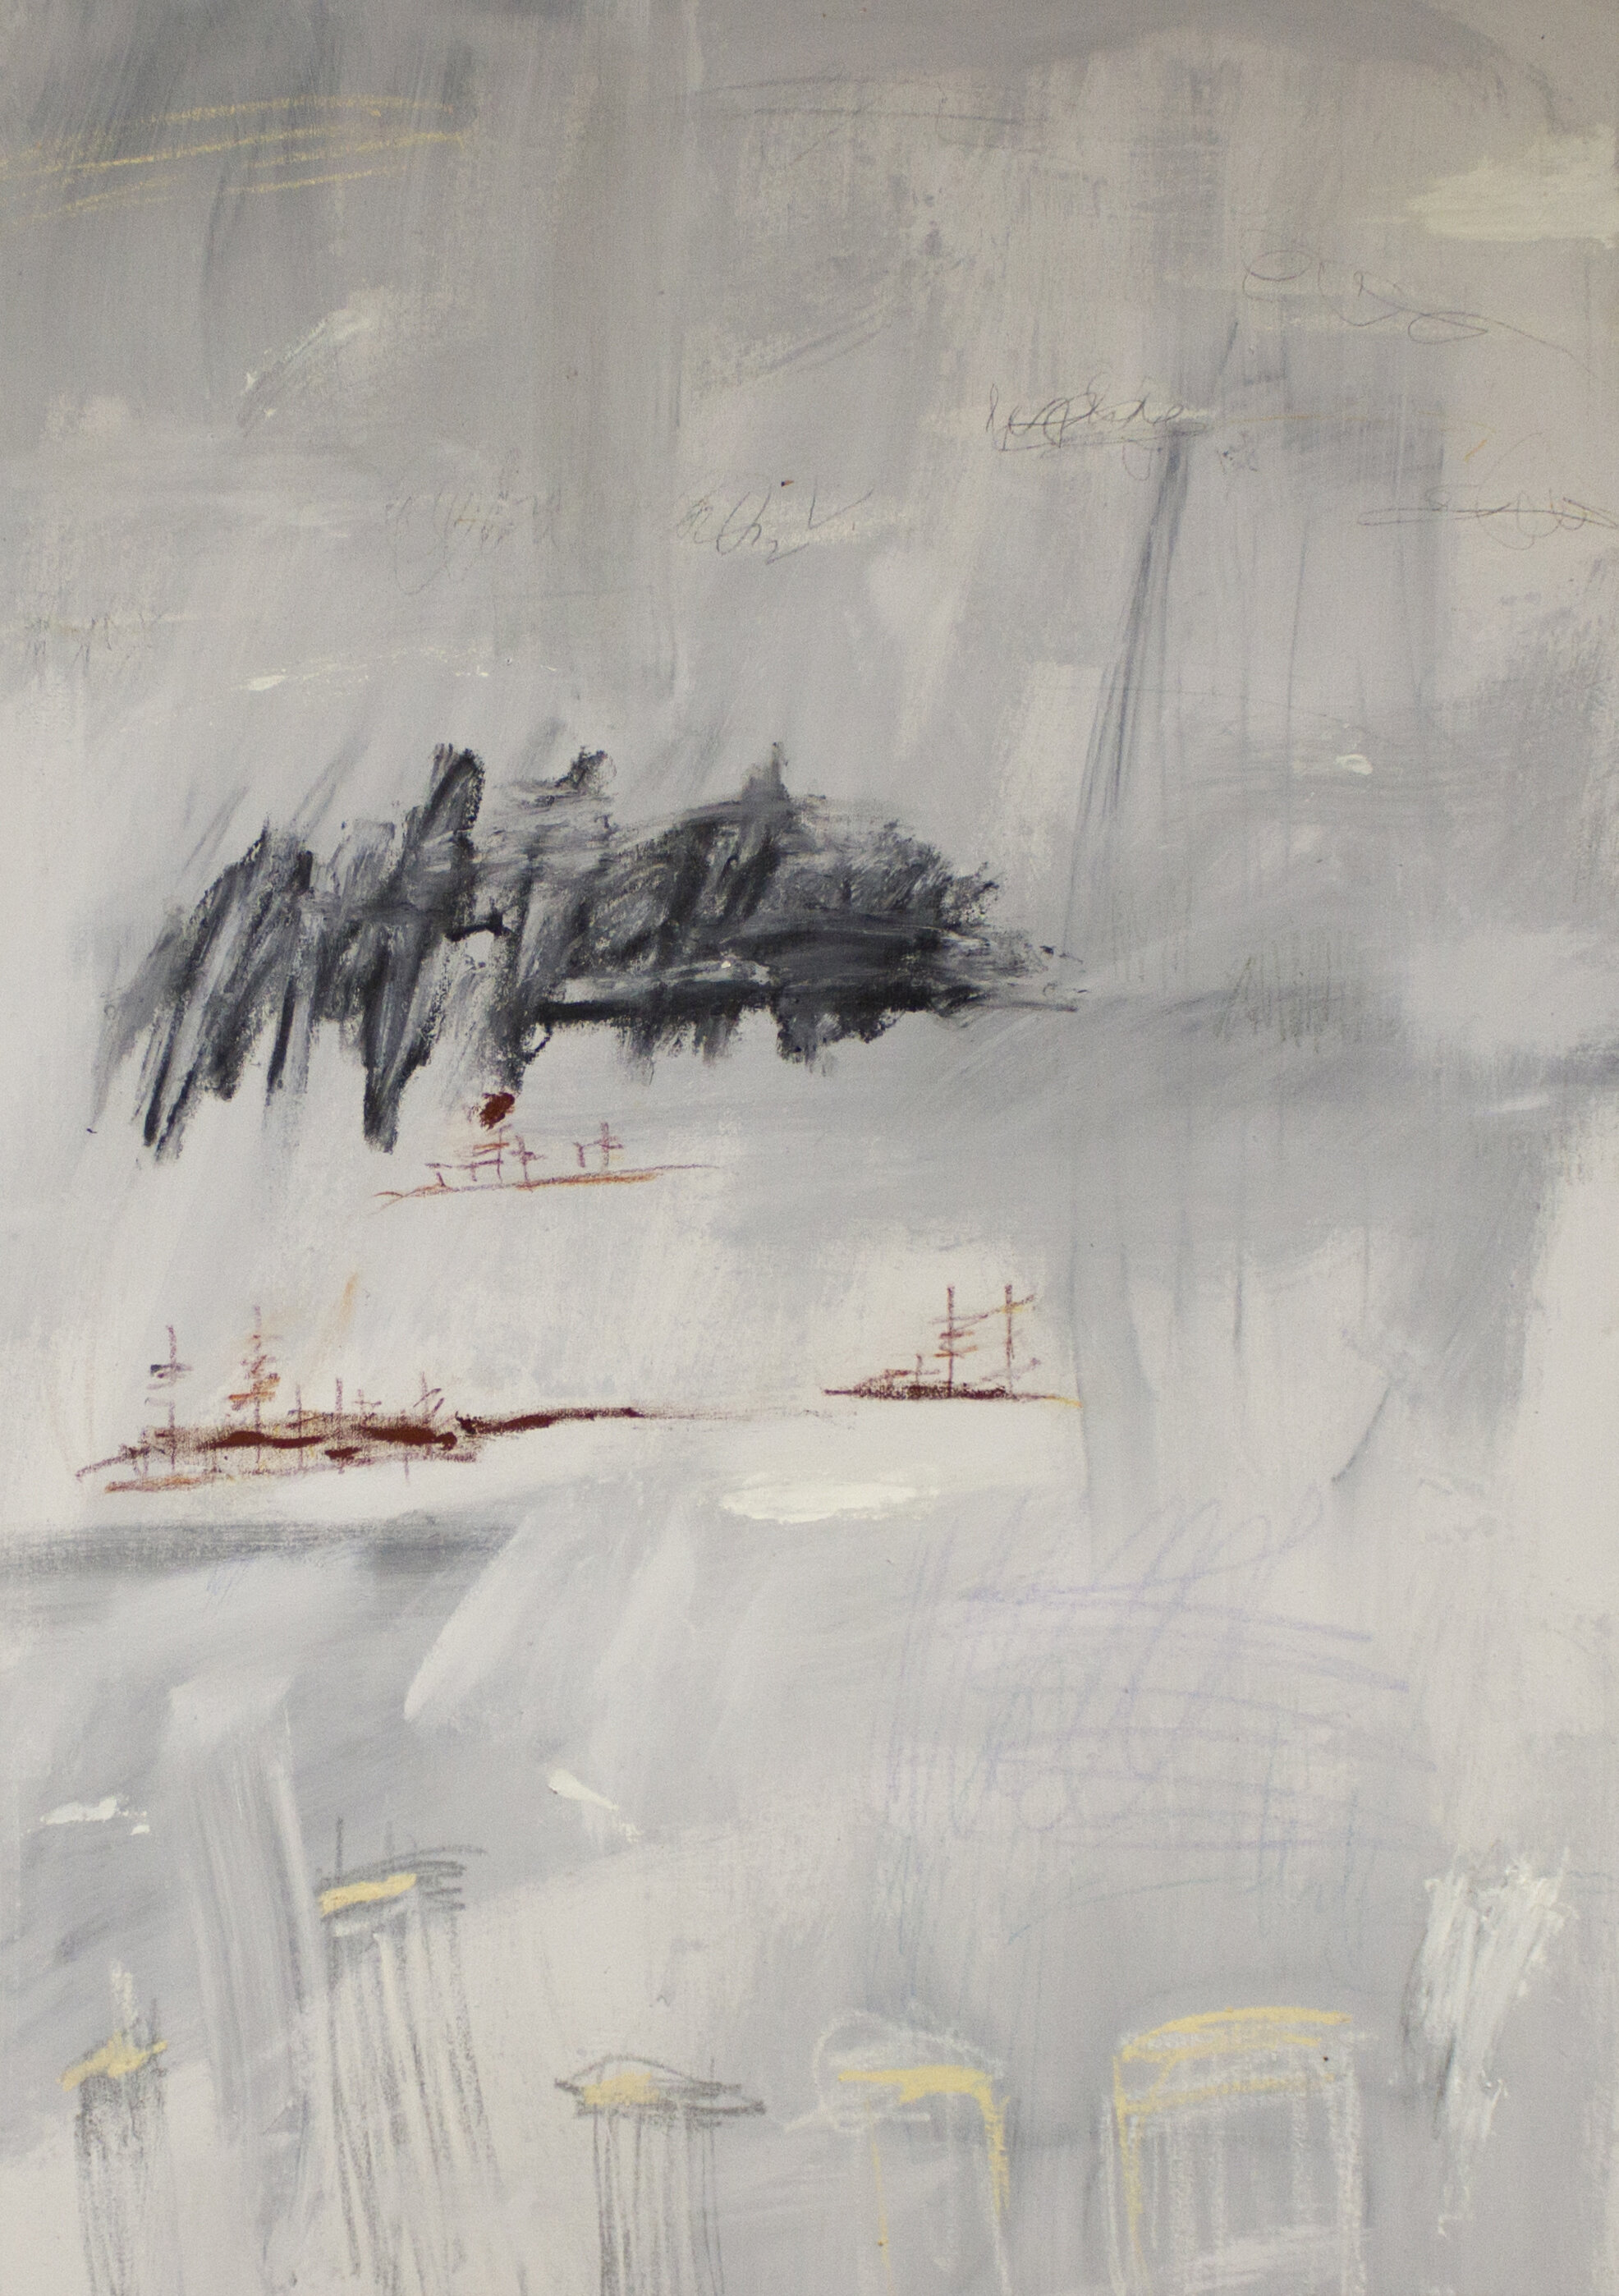   As We Sit, Waiting The Impending , 2021  58 x 42 Inches  Oil, Acrylic, Oil Pastel, Crayon, Chalk Pastel, Graphite, and Charcoal on Canvas  Private Collection 